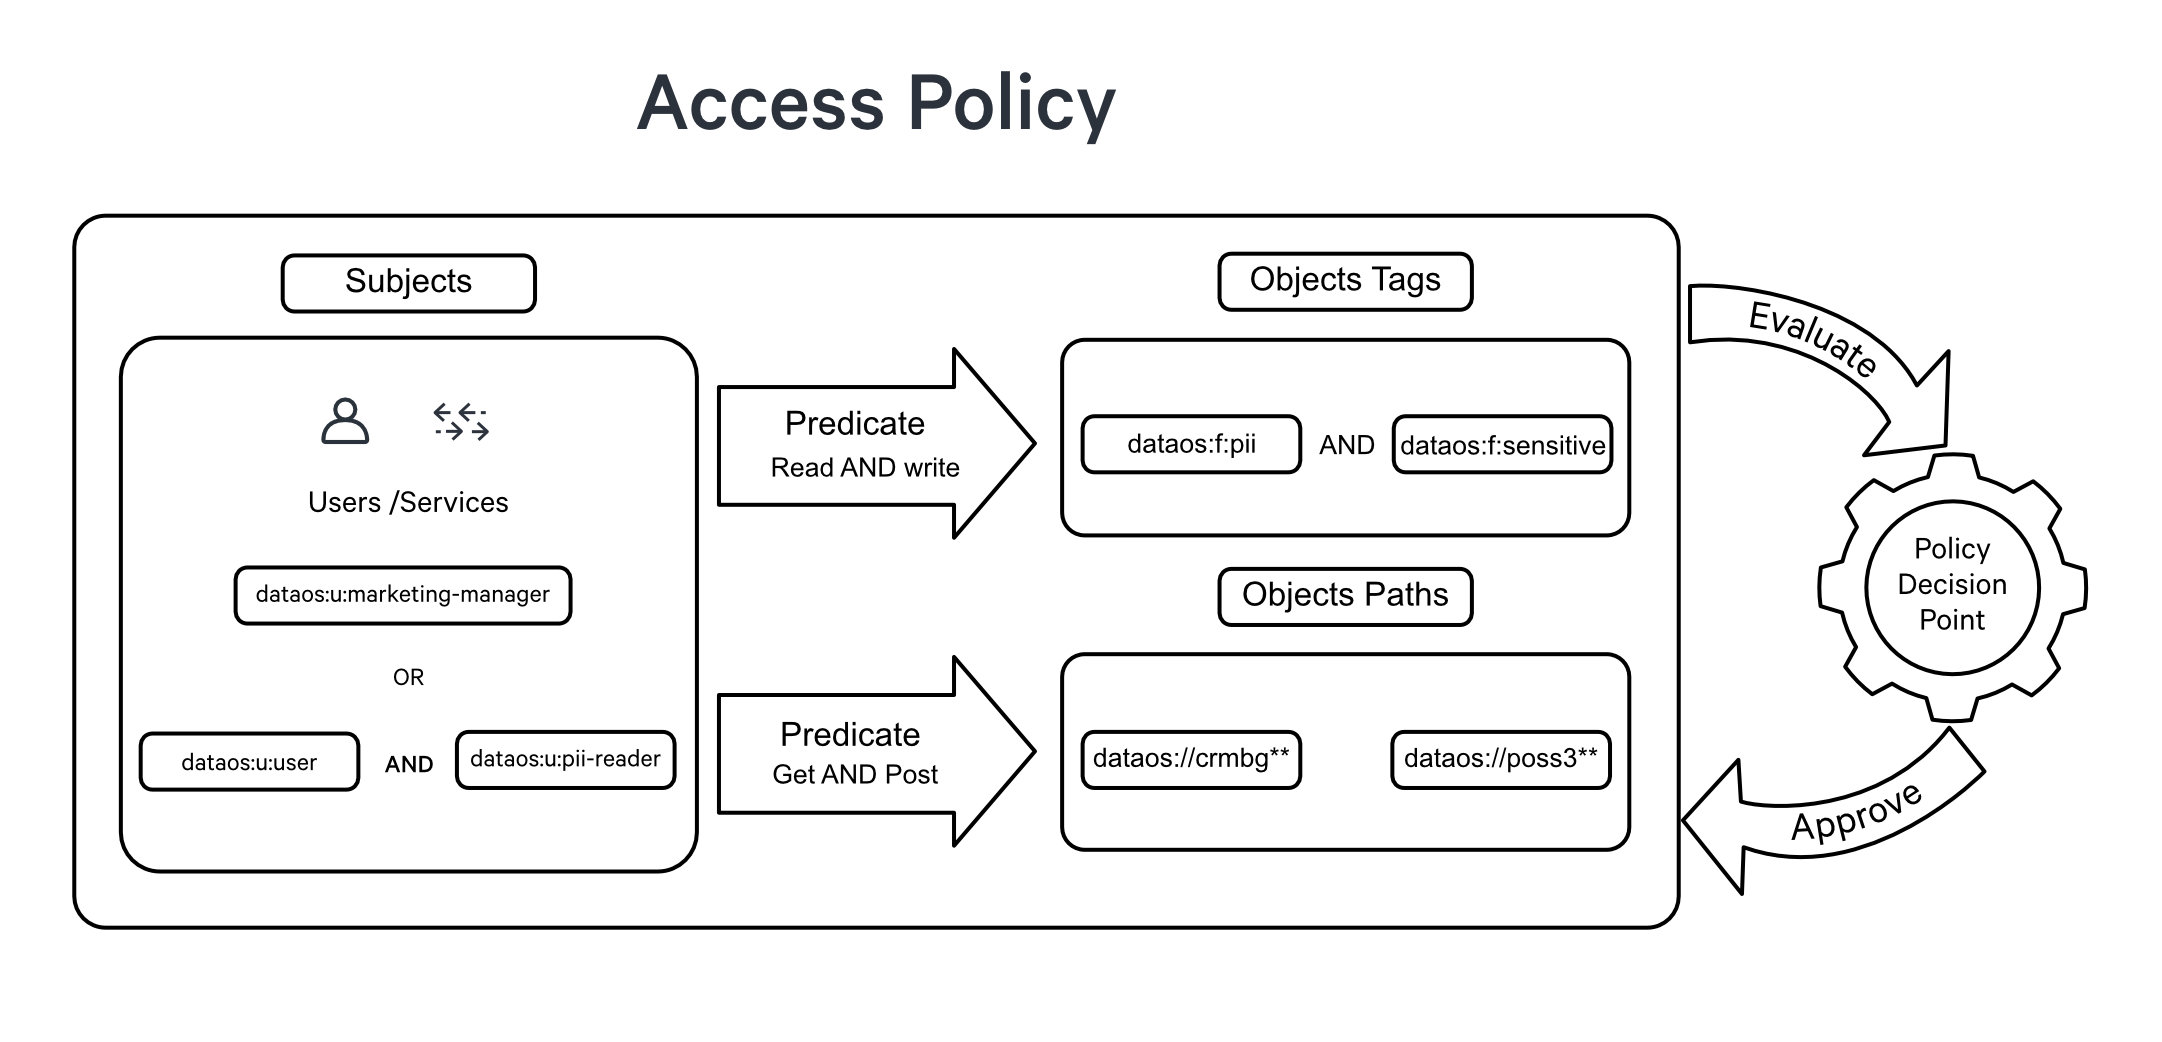 Configuration of Access Policy